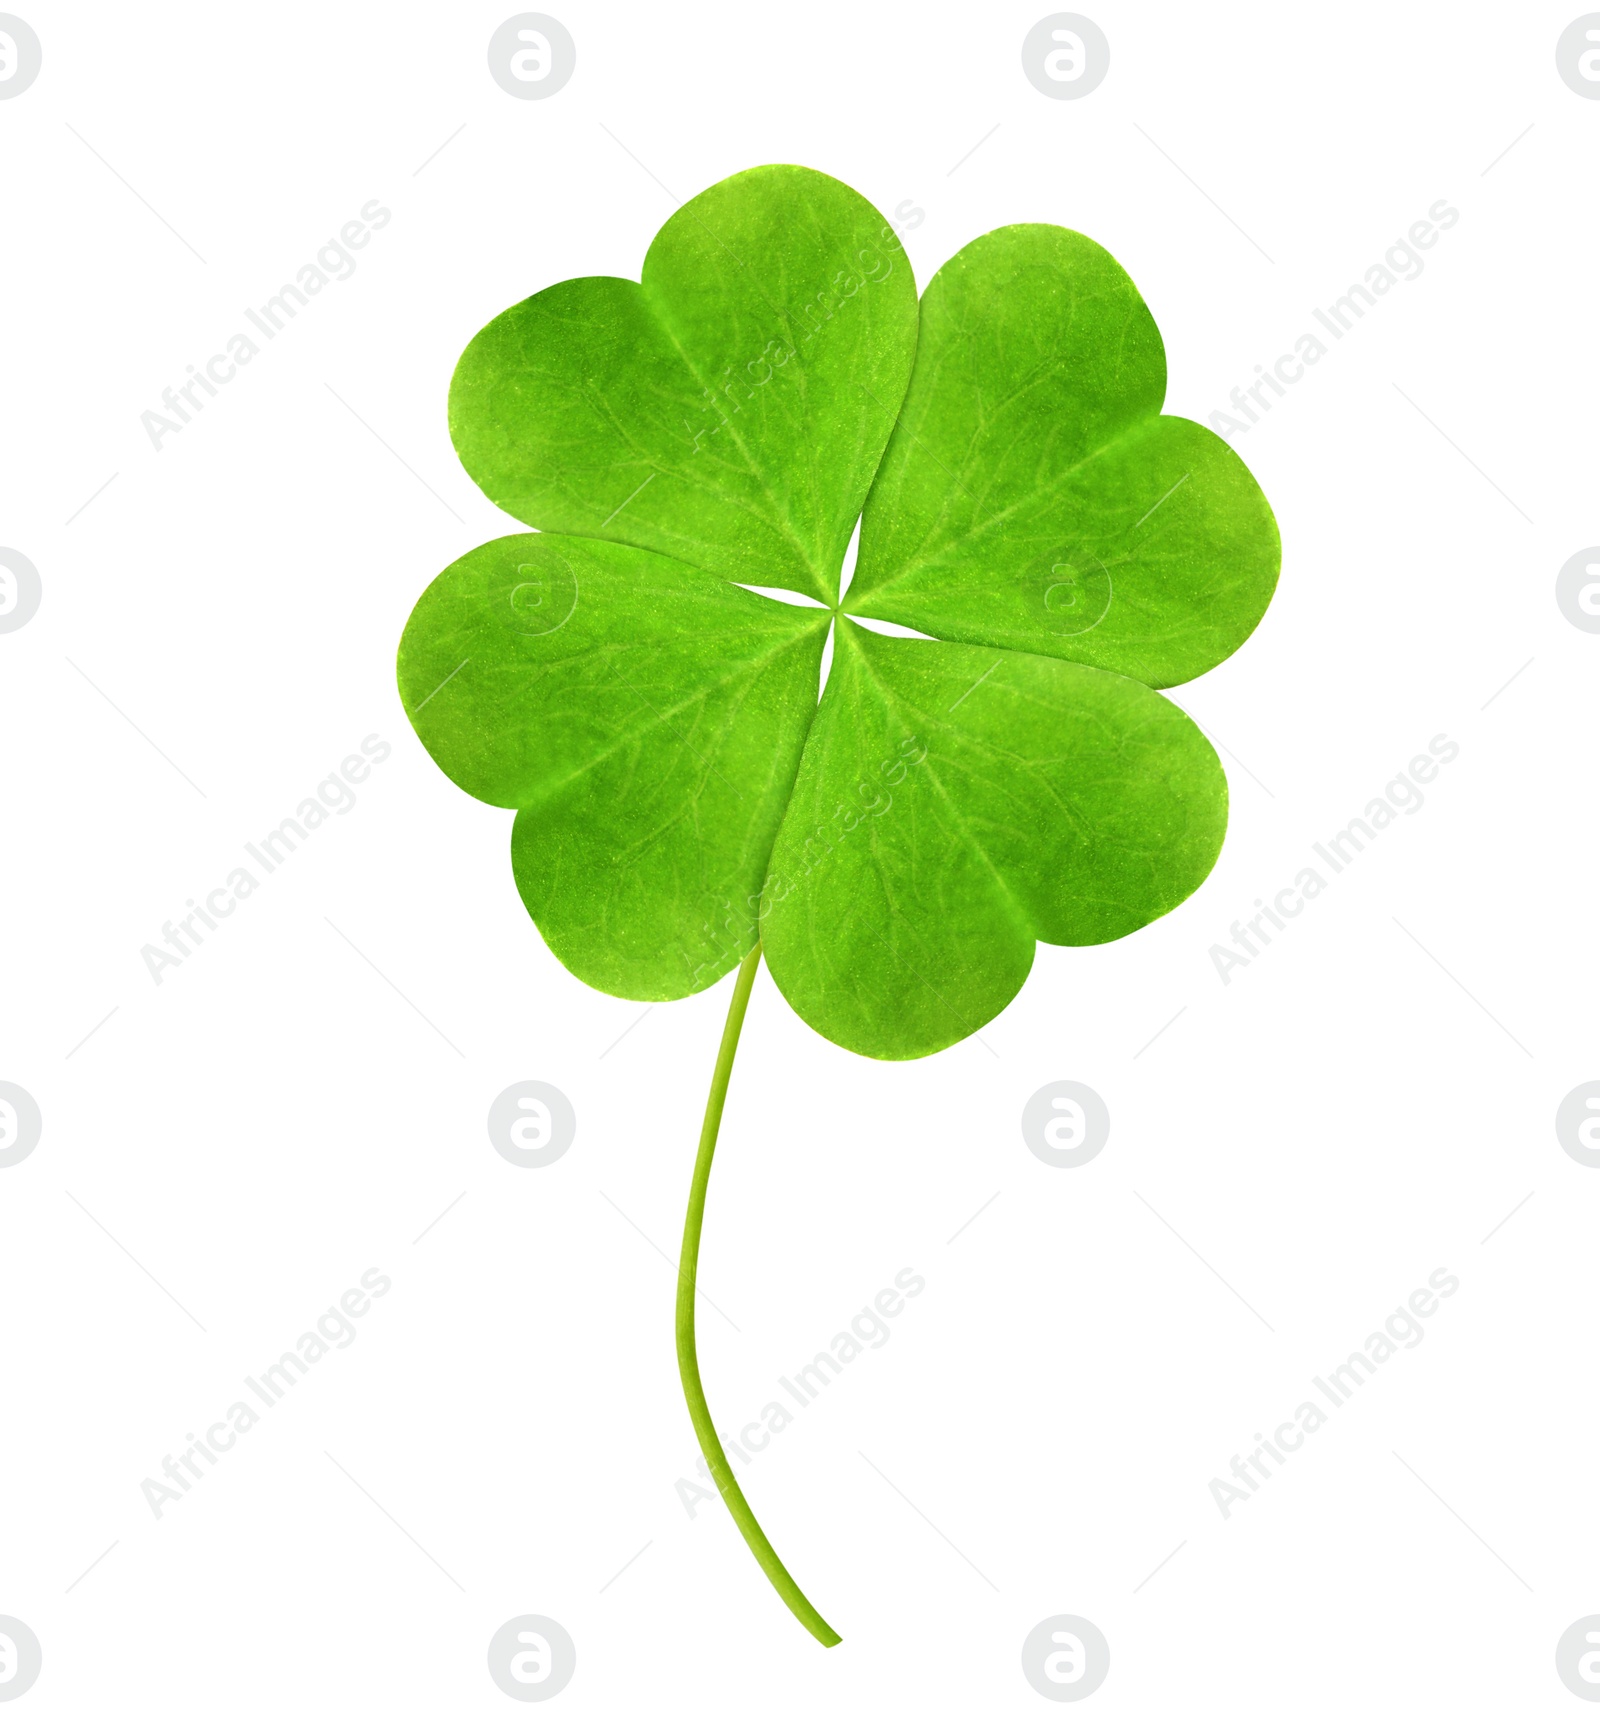 Image of Fresh green four-leaf clover on white background